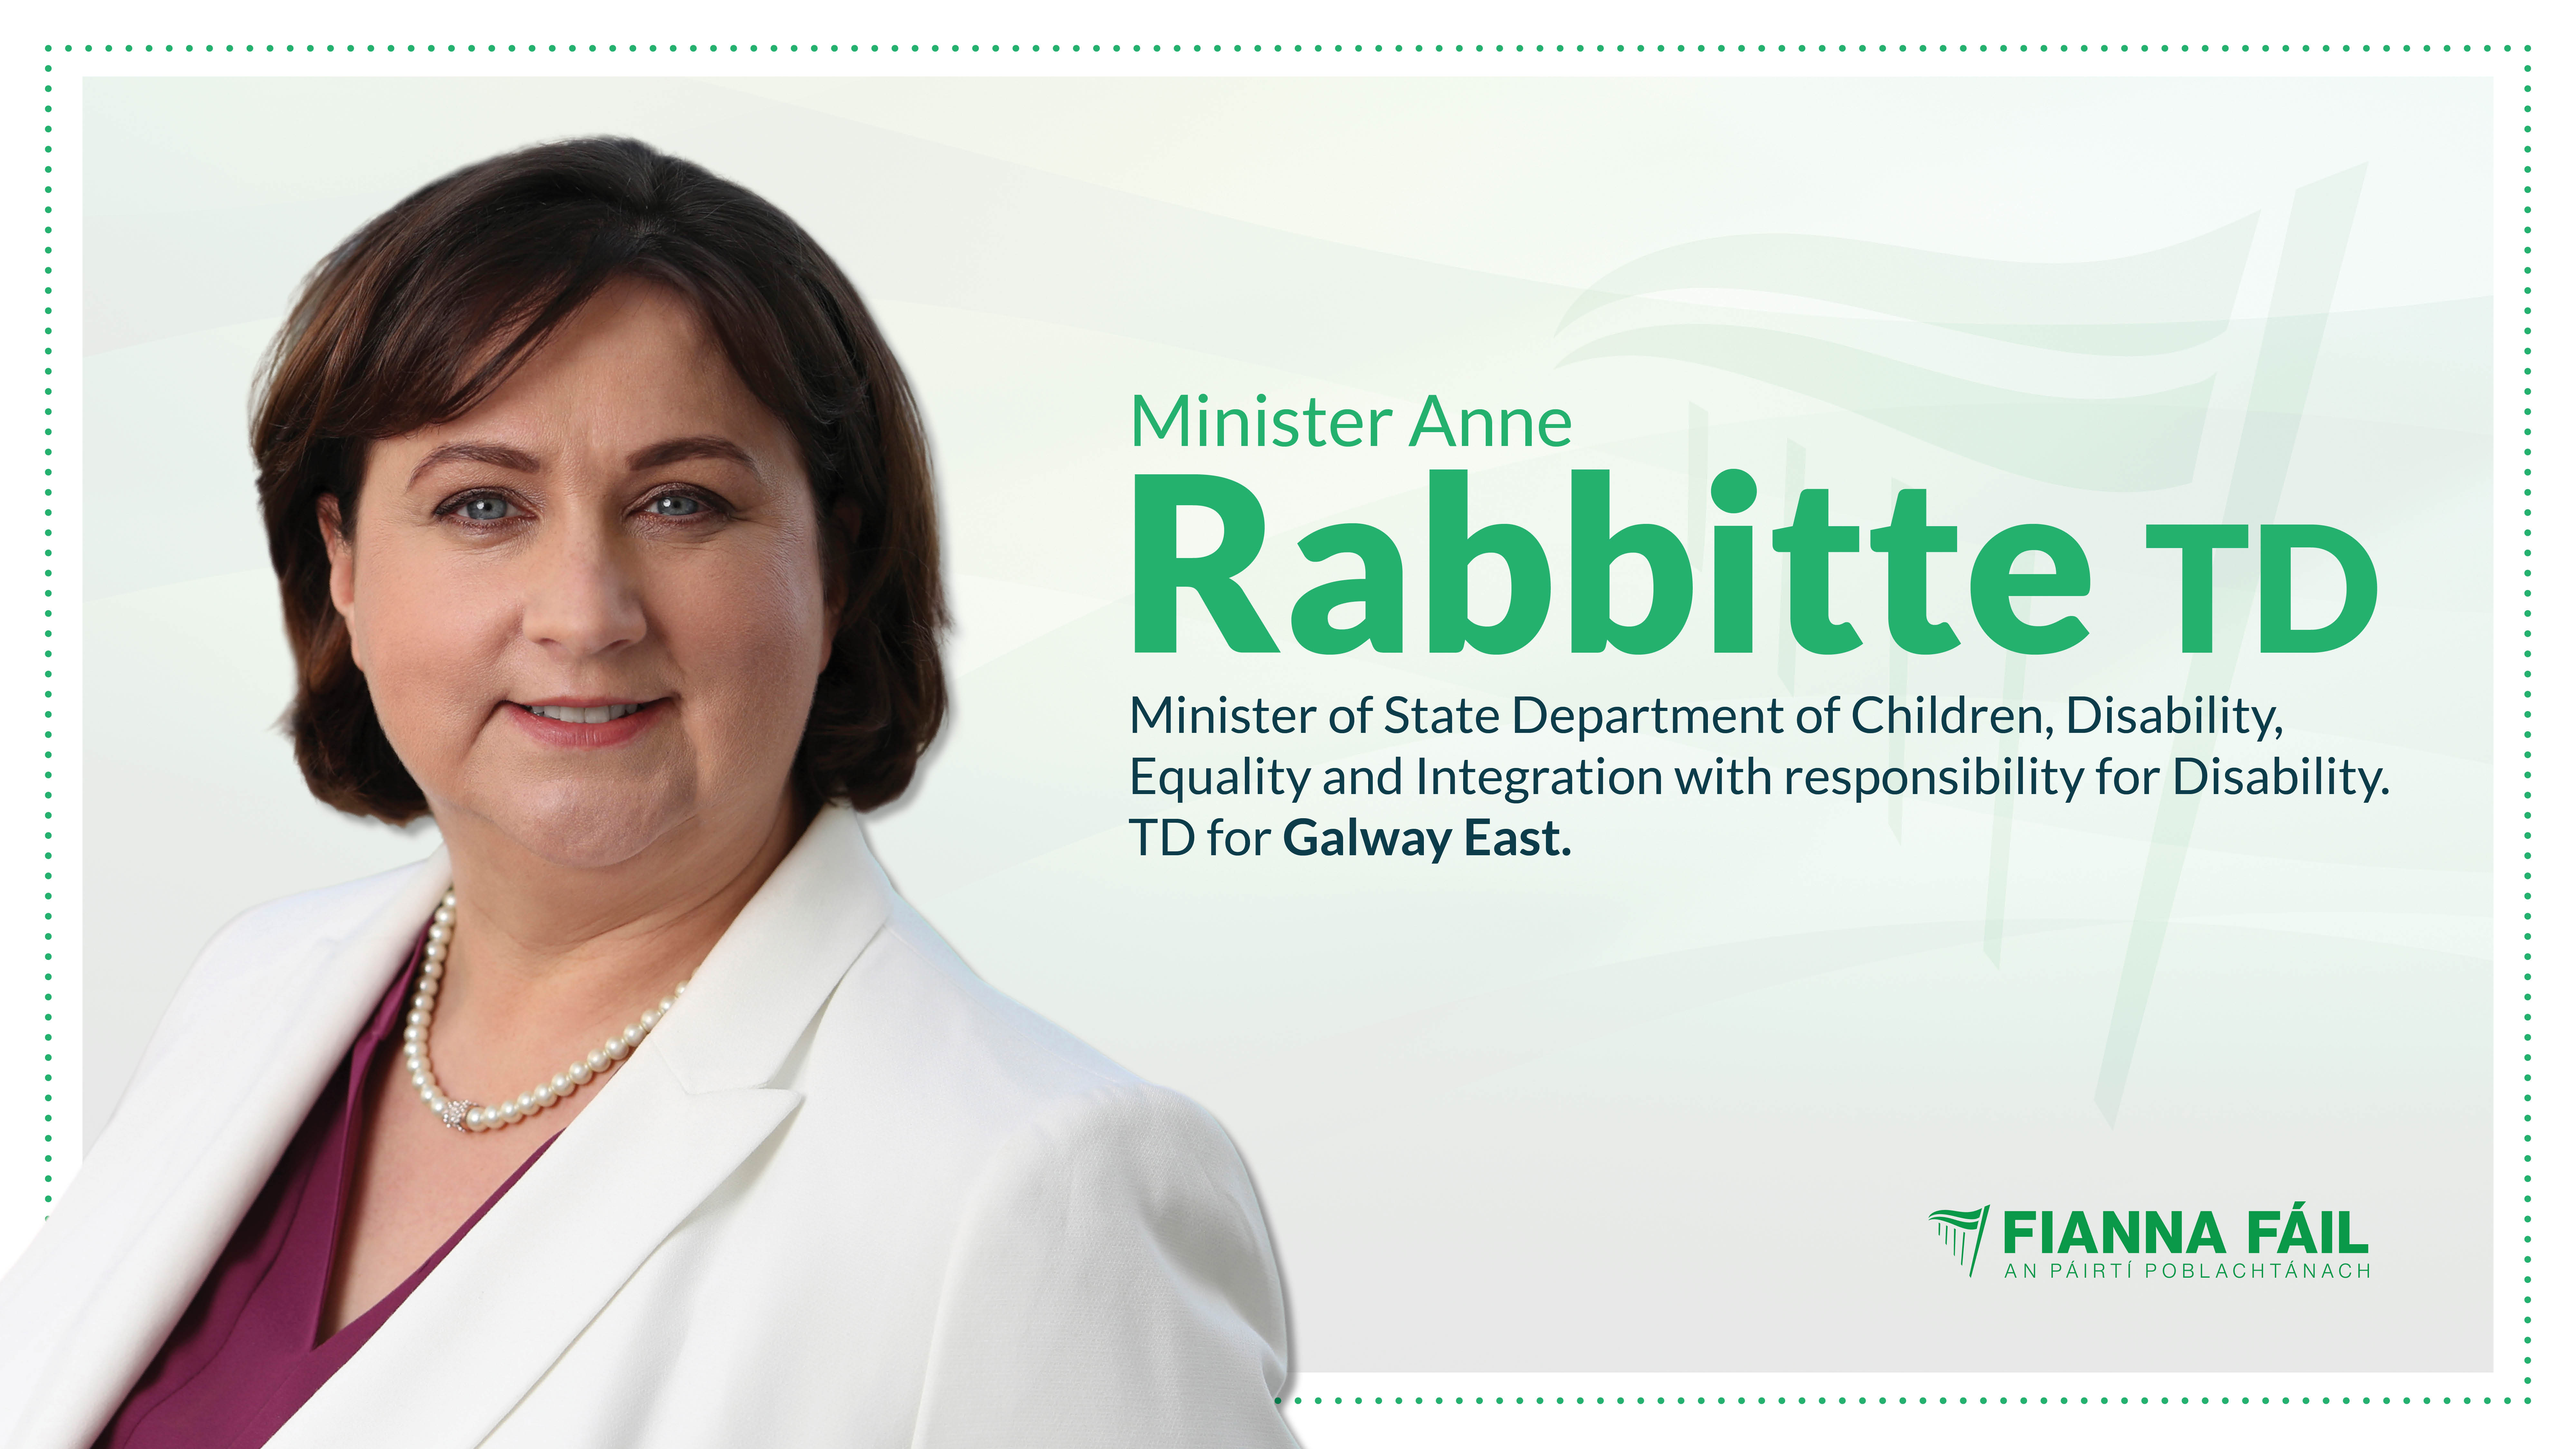 Gamechanger First Home Scheme can make homeownership a reality for first-time buyers – Minister Anne Rabbitte